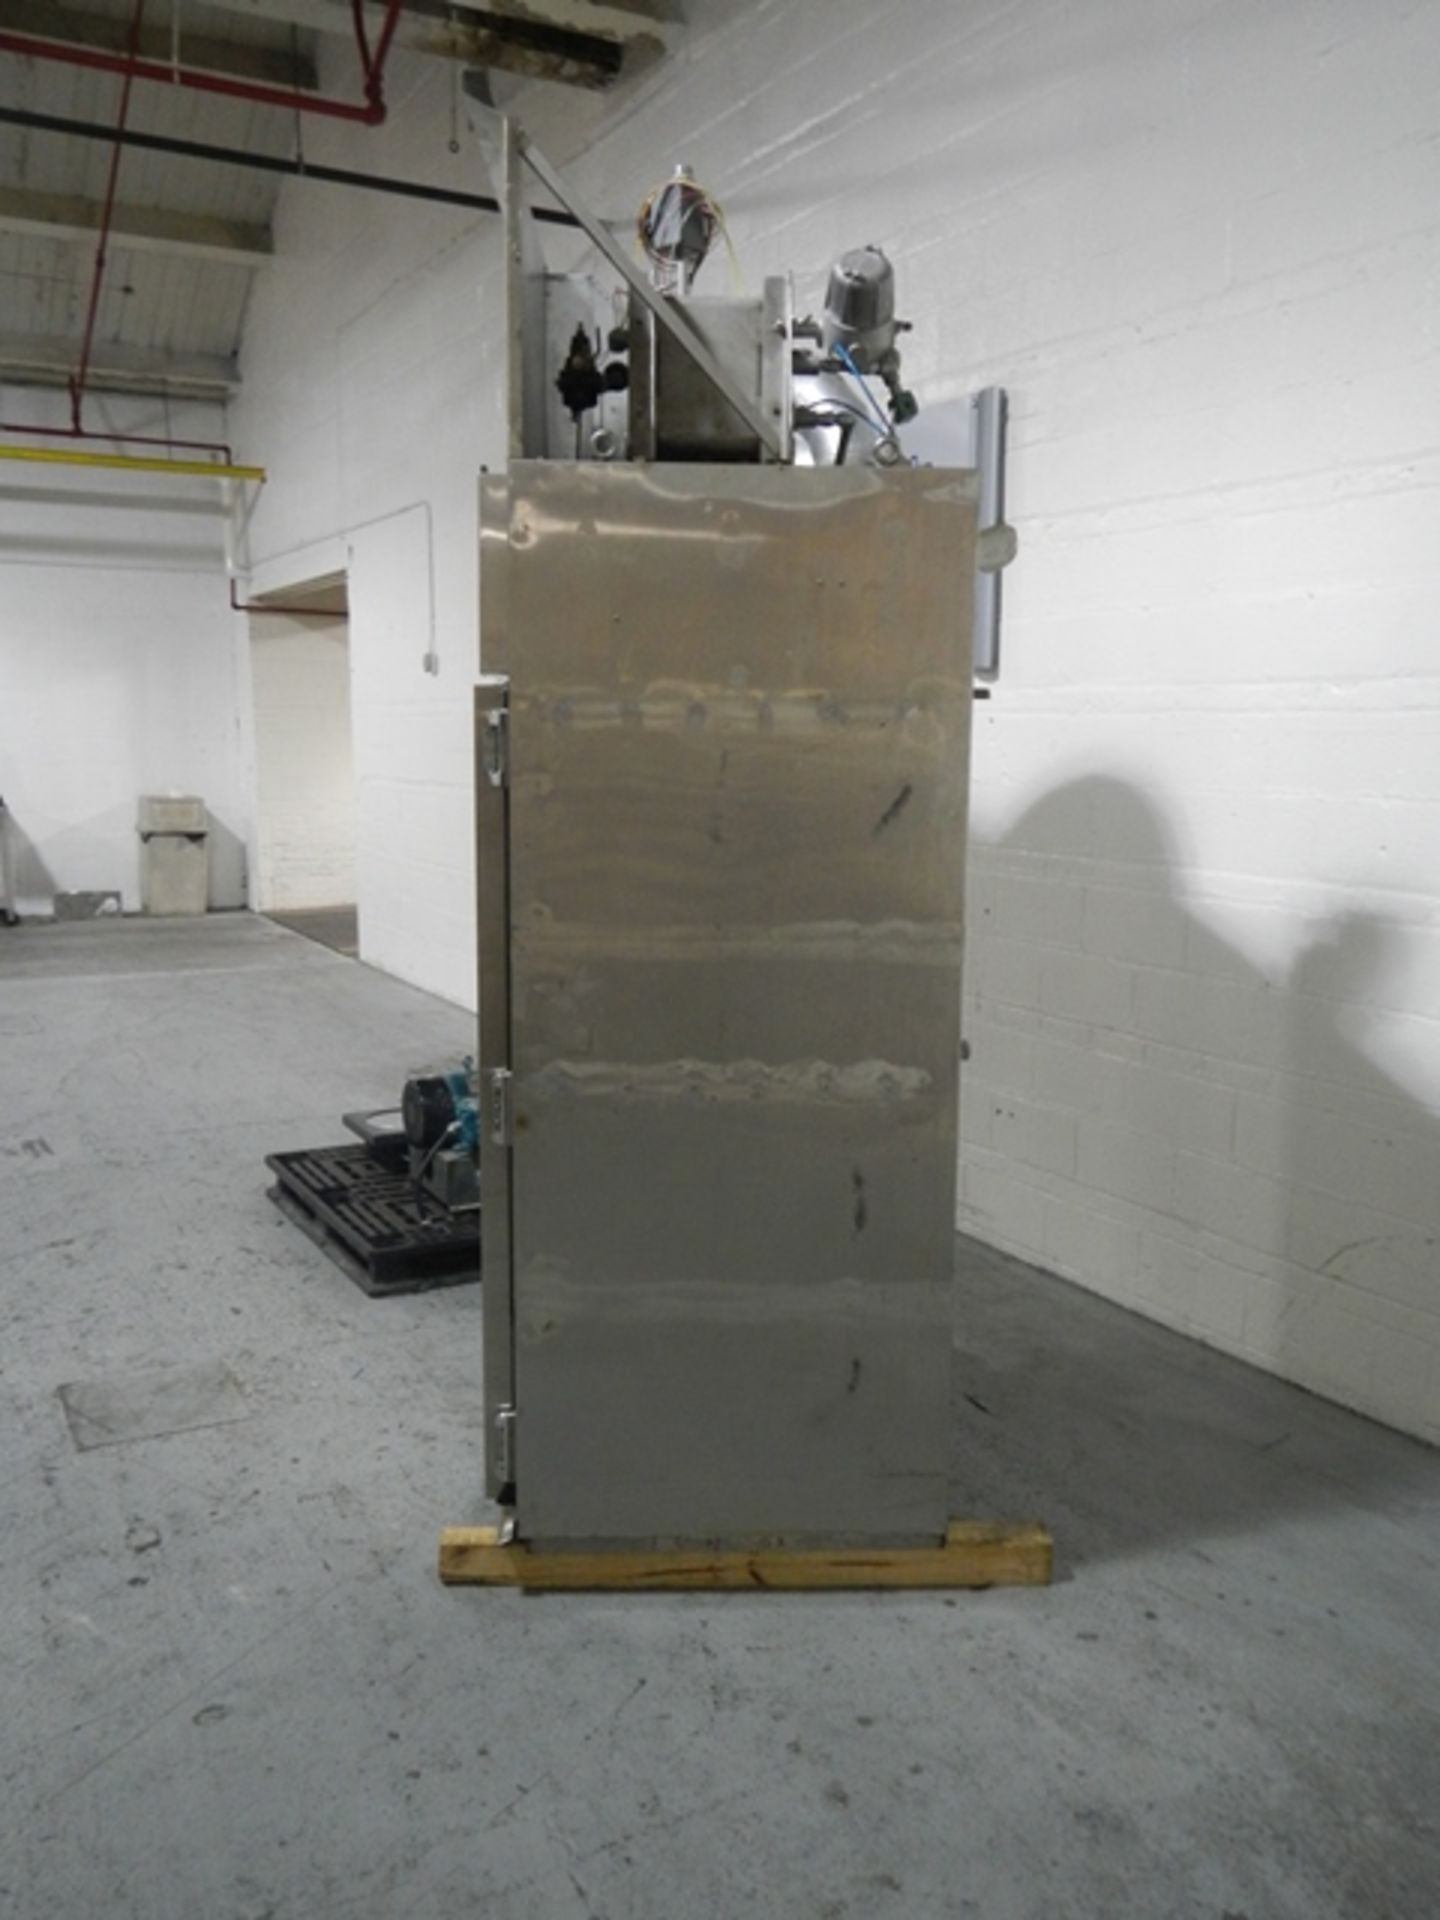 150 SQ FT STOKES OVEN, MODEL 38-7, 304 S/S - Image 2 of 9